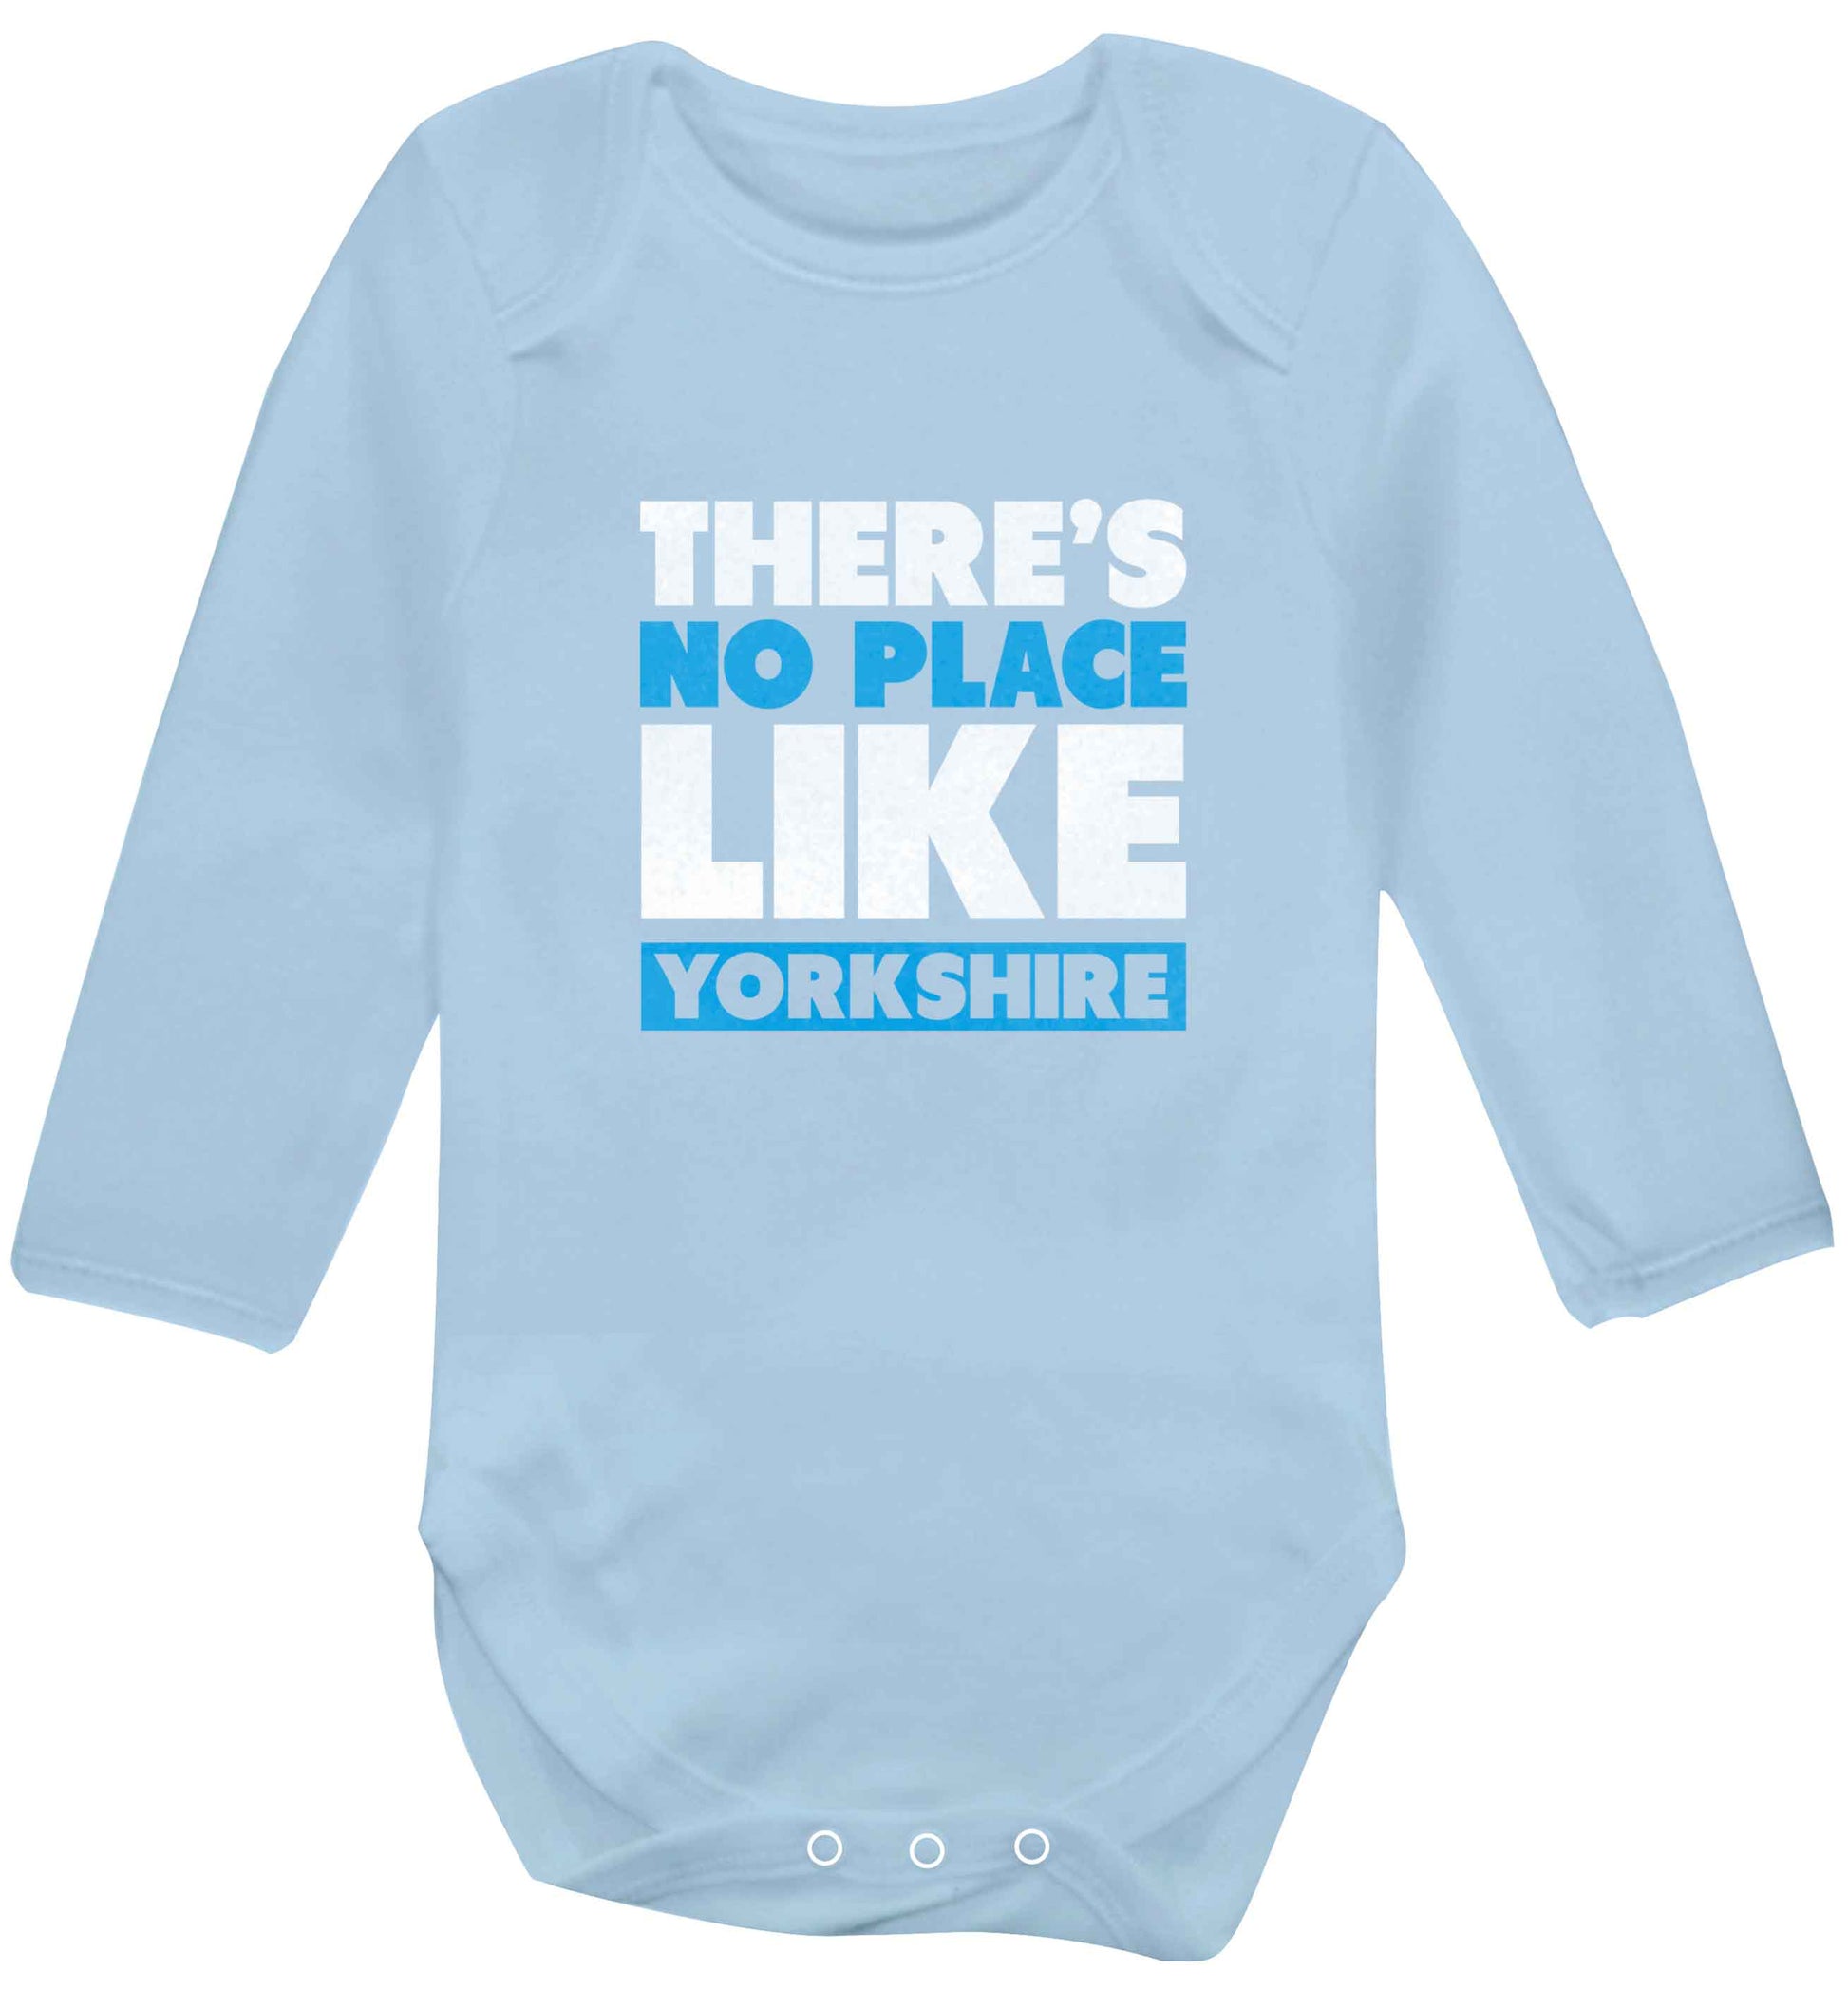 There's no place like Yorkshire baby vest long sleeved pale blue 6-12 months